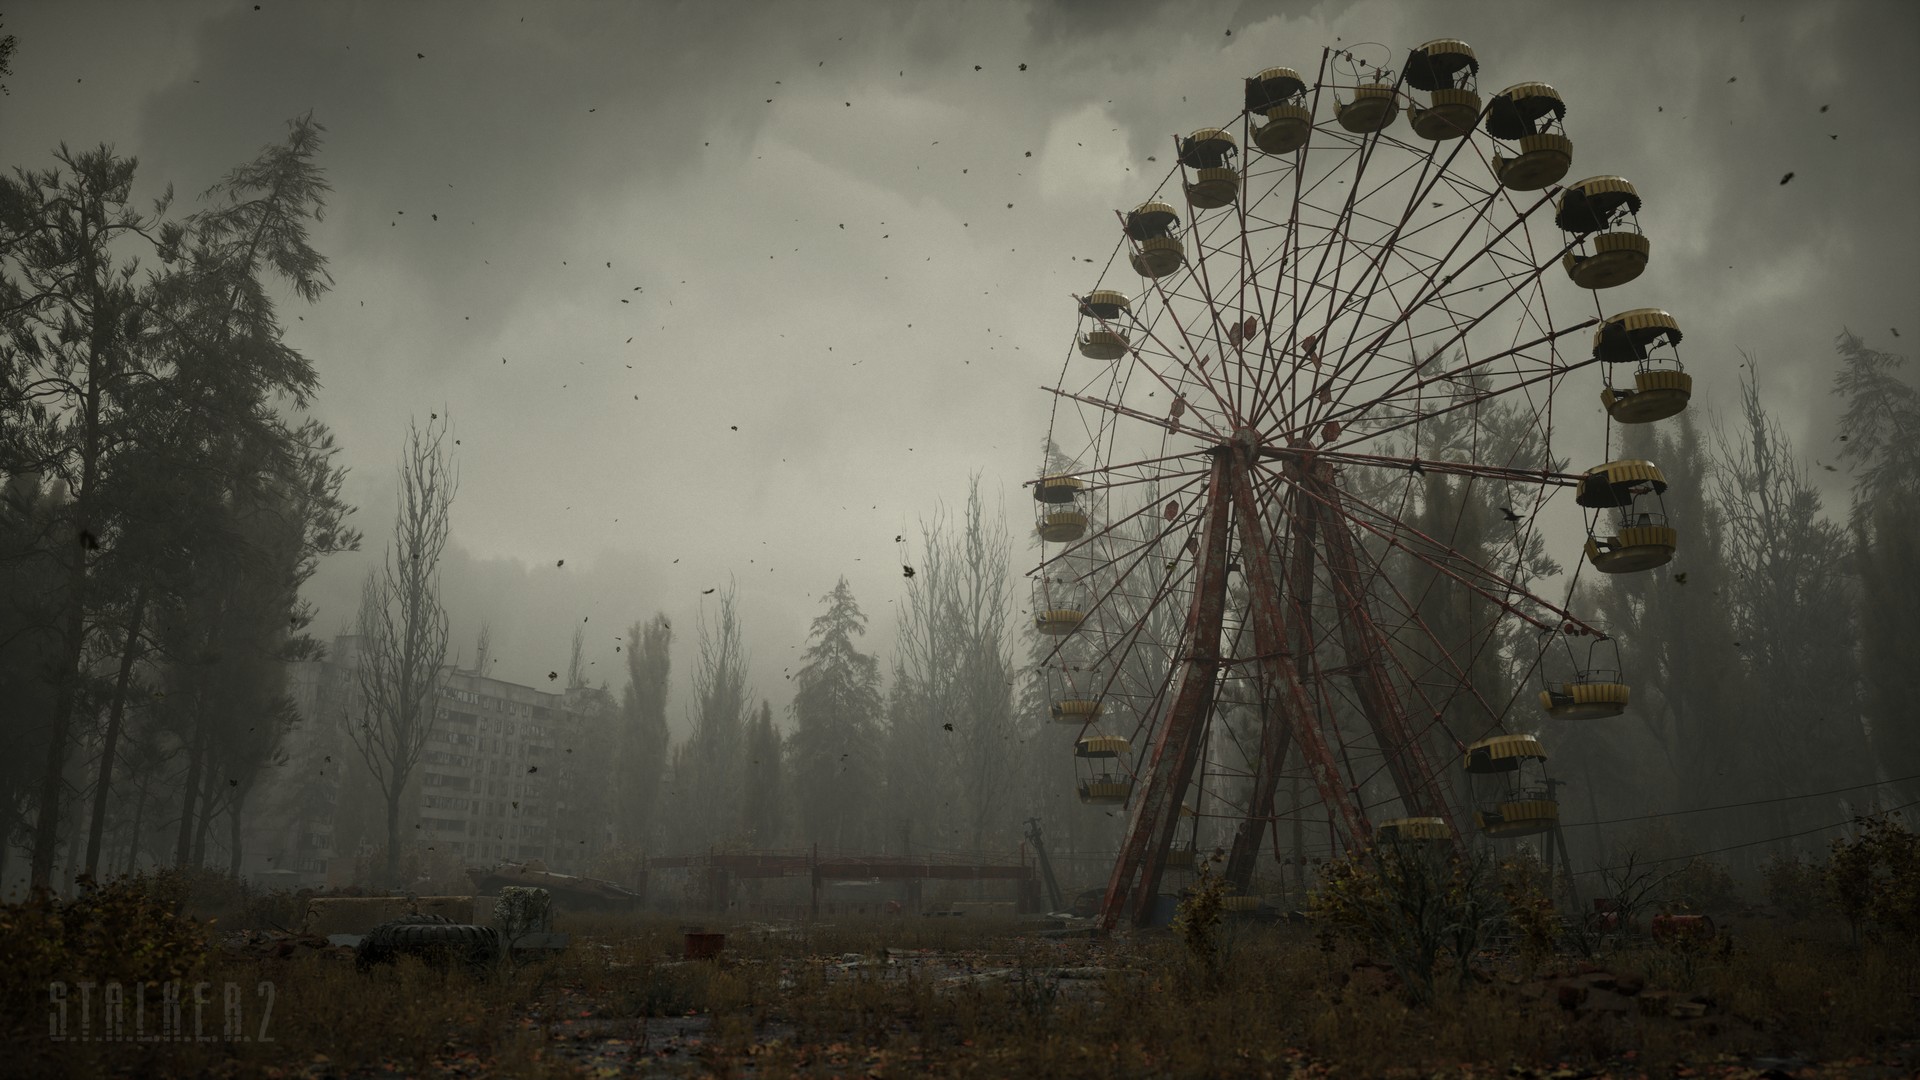 S.T.A.L.K.E.R. 2: Heart of Chernobyl Picture